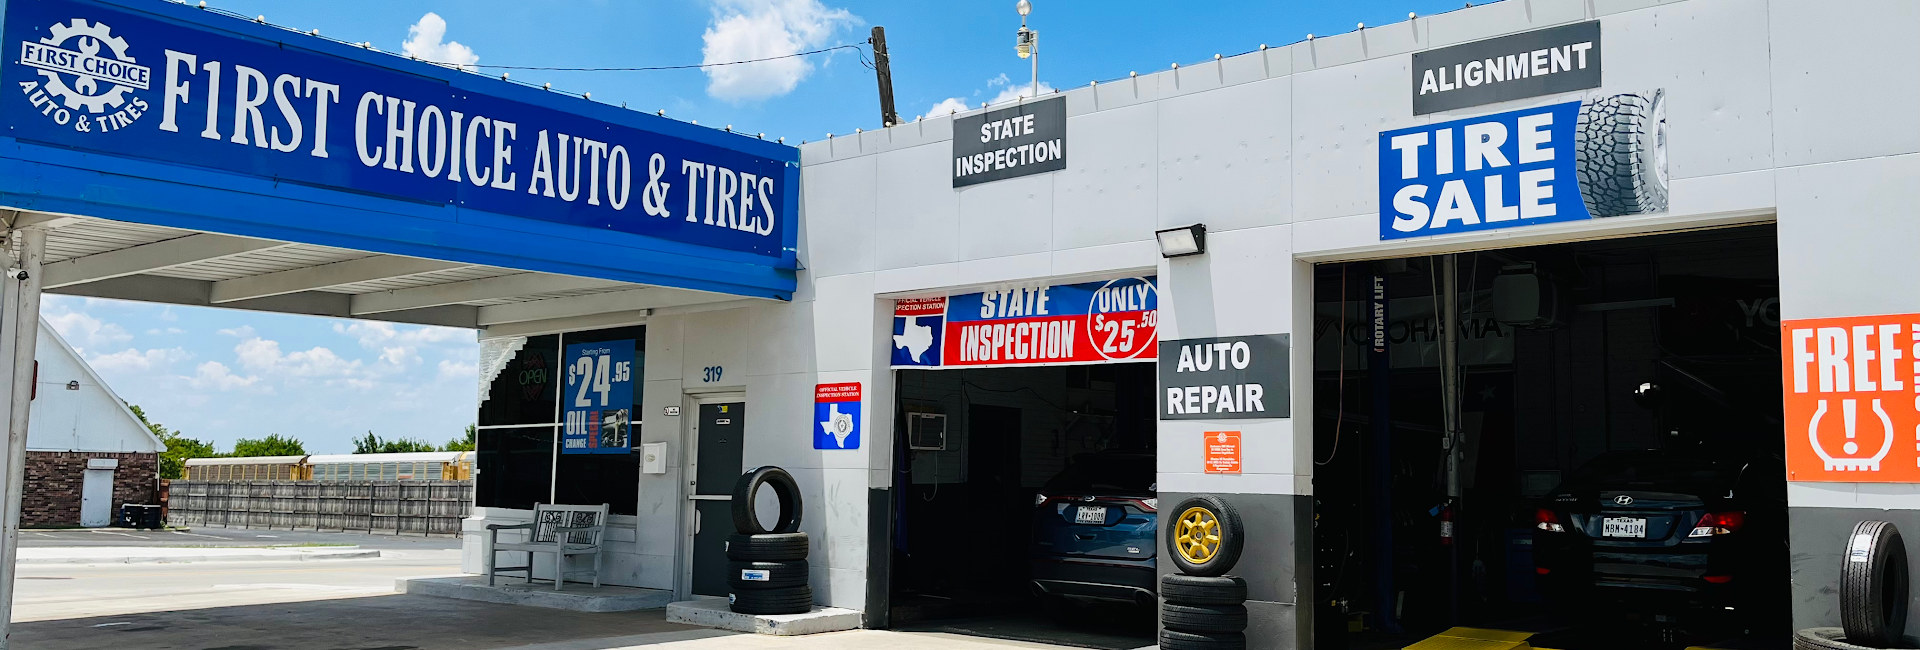 FIRST CHOICE AUTO & TIRES 6